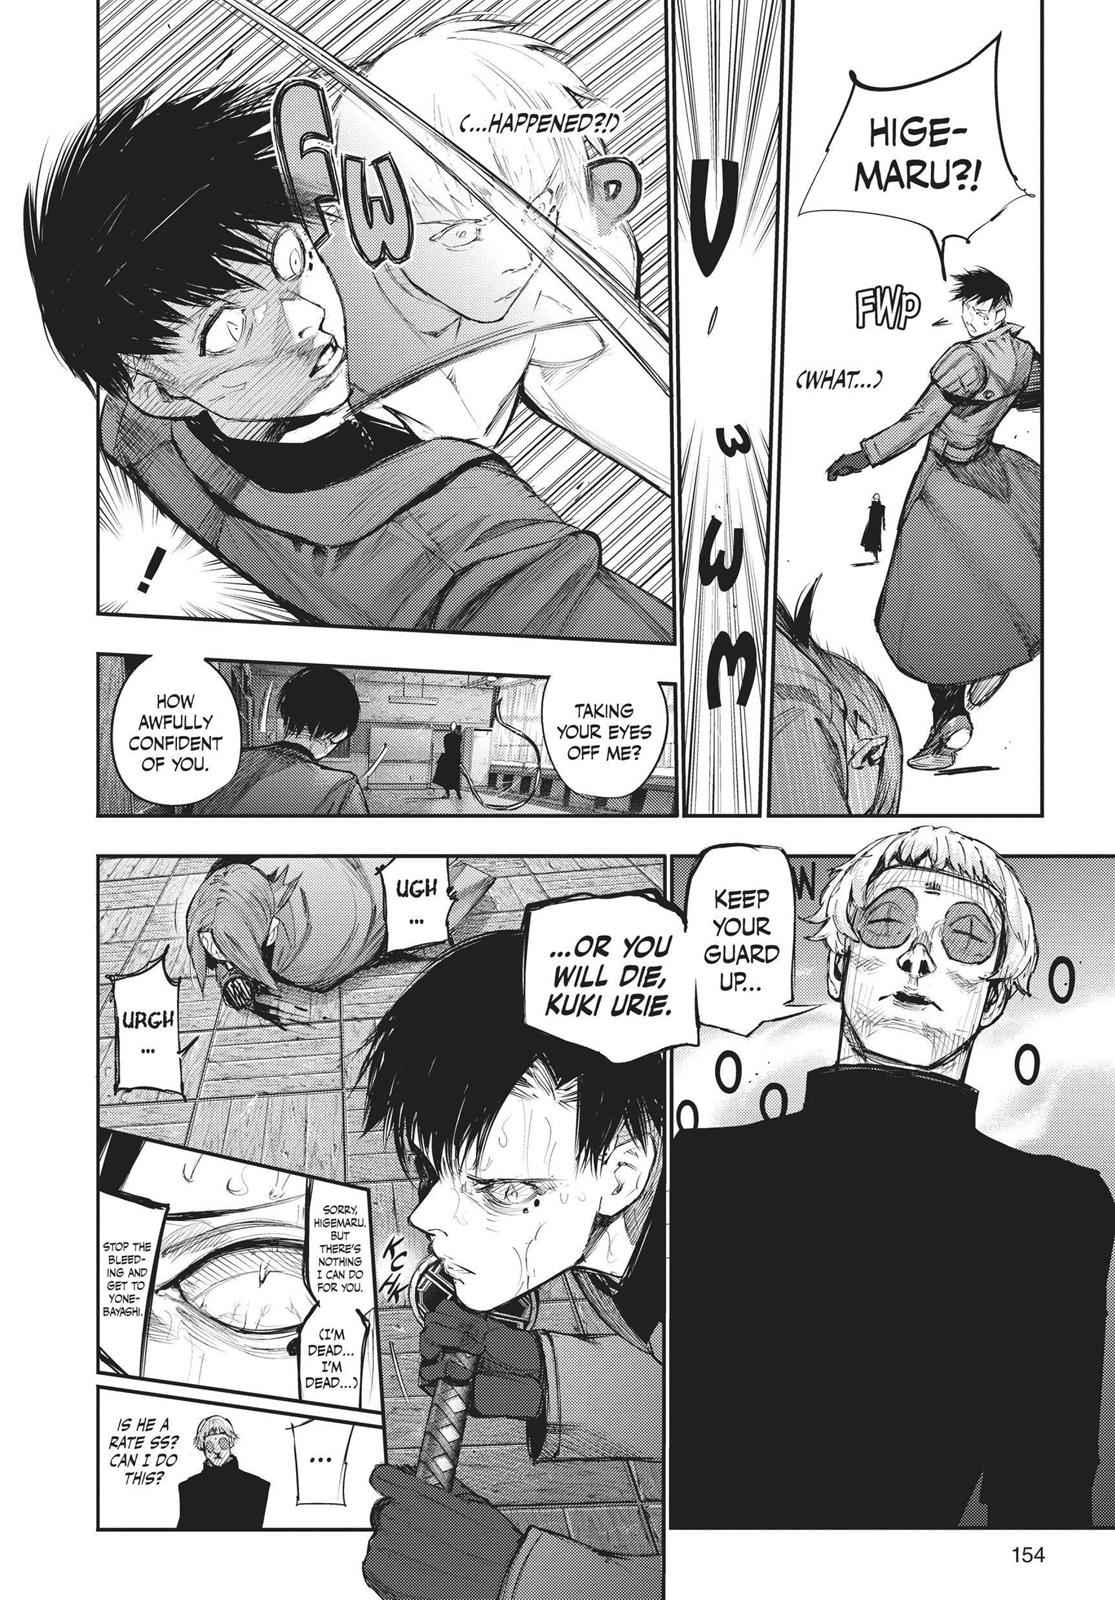 Tokyo Ghoul:re 30 - Read Tokyo Ghoul:re ch.30 Online For Free - Stream 3  Edition 1 Page All - MangaPark